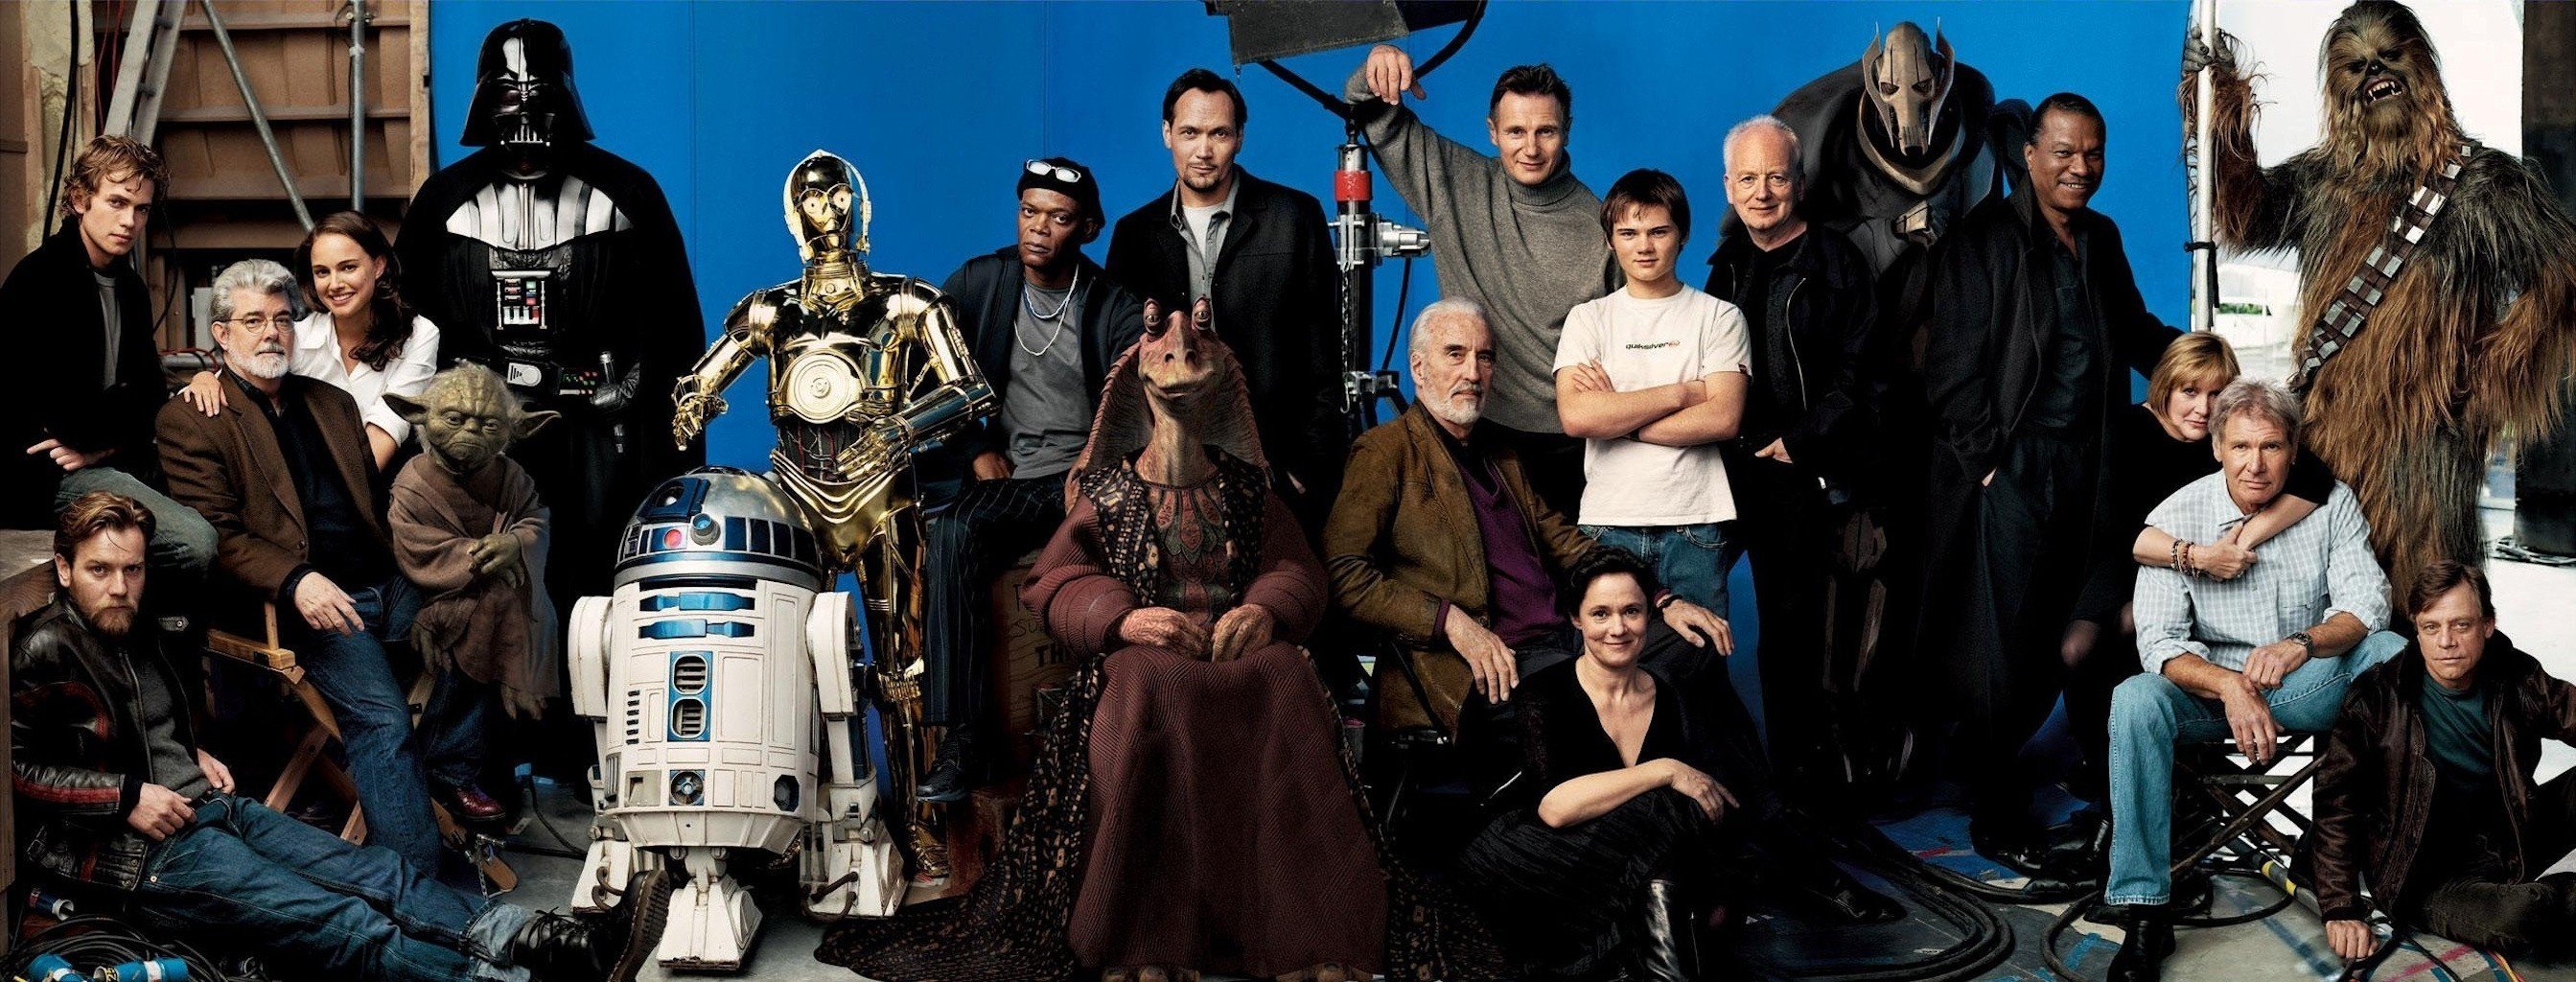 The collective from Star Wars all together